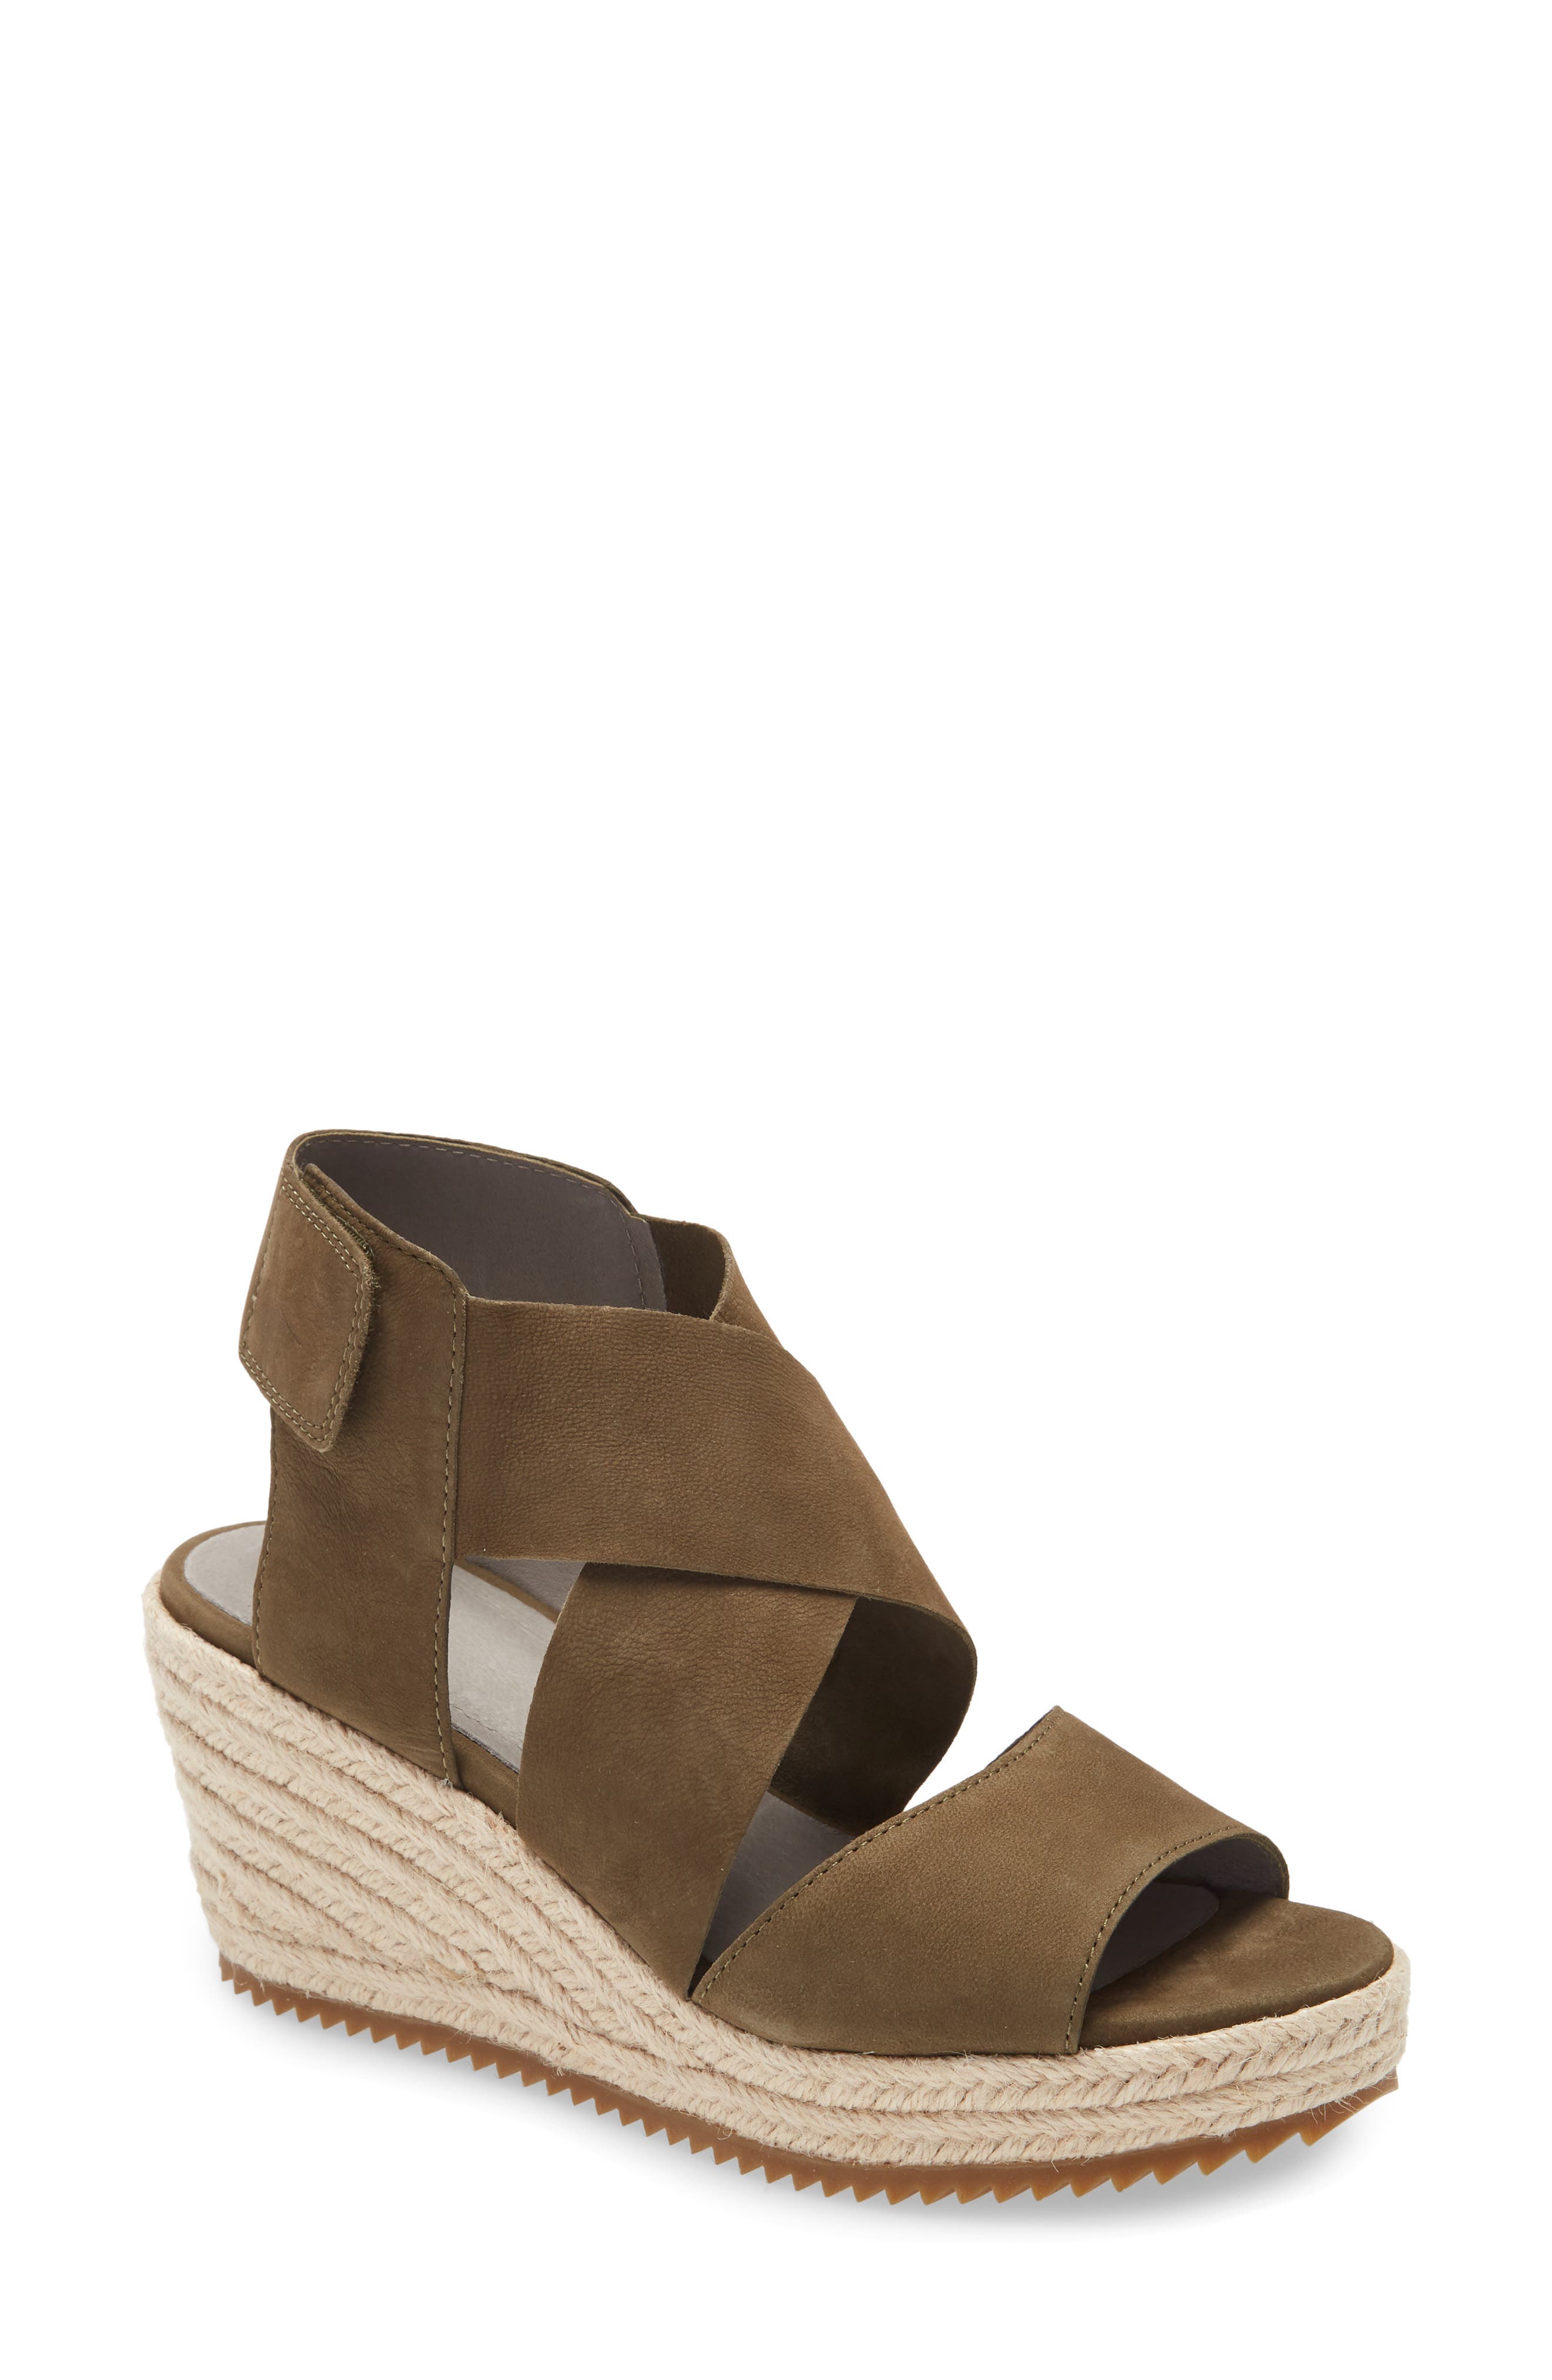 Eileen Fisher 'willow' Espadrille Wedge Sandal In Olive Nubuck Leather